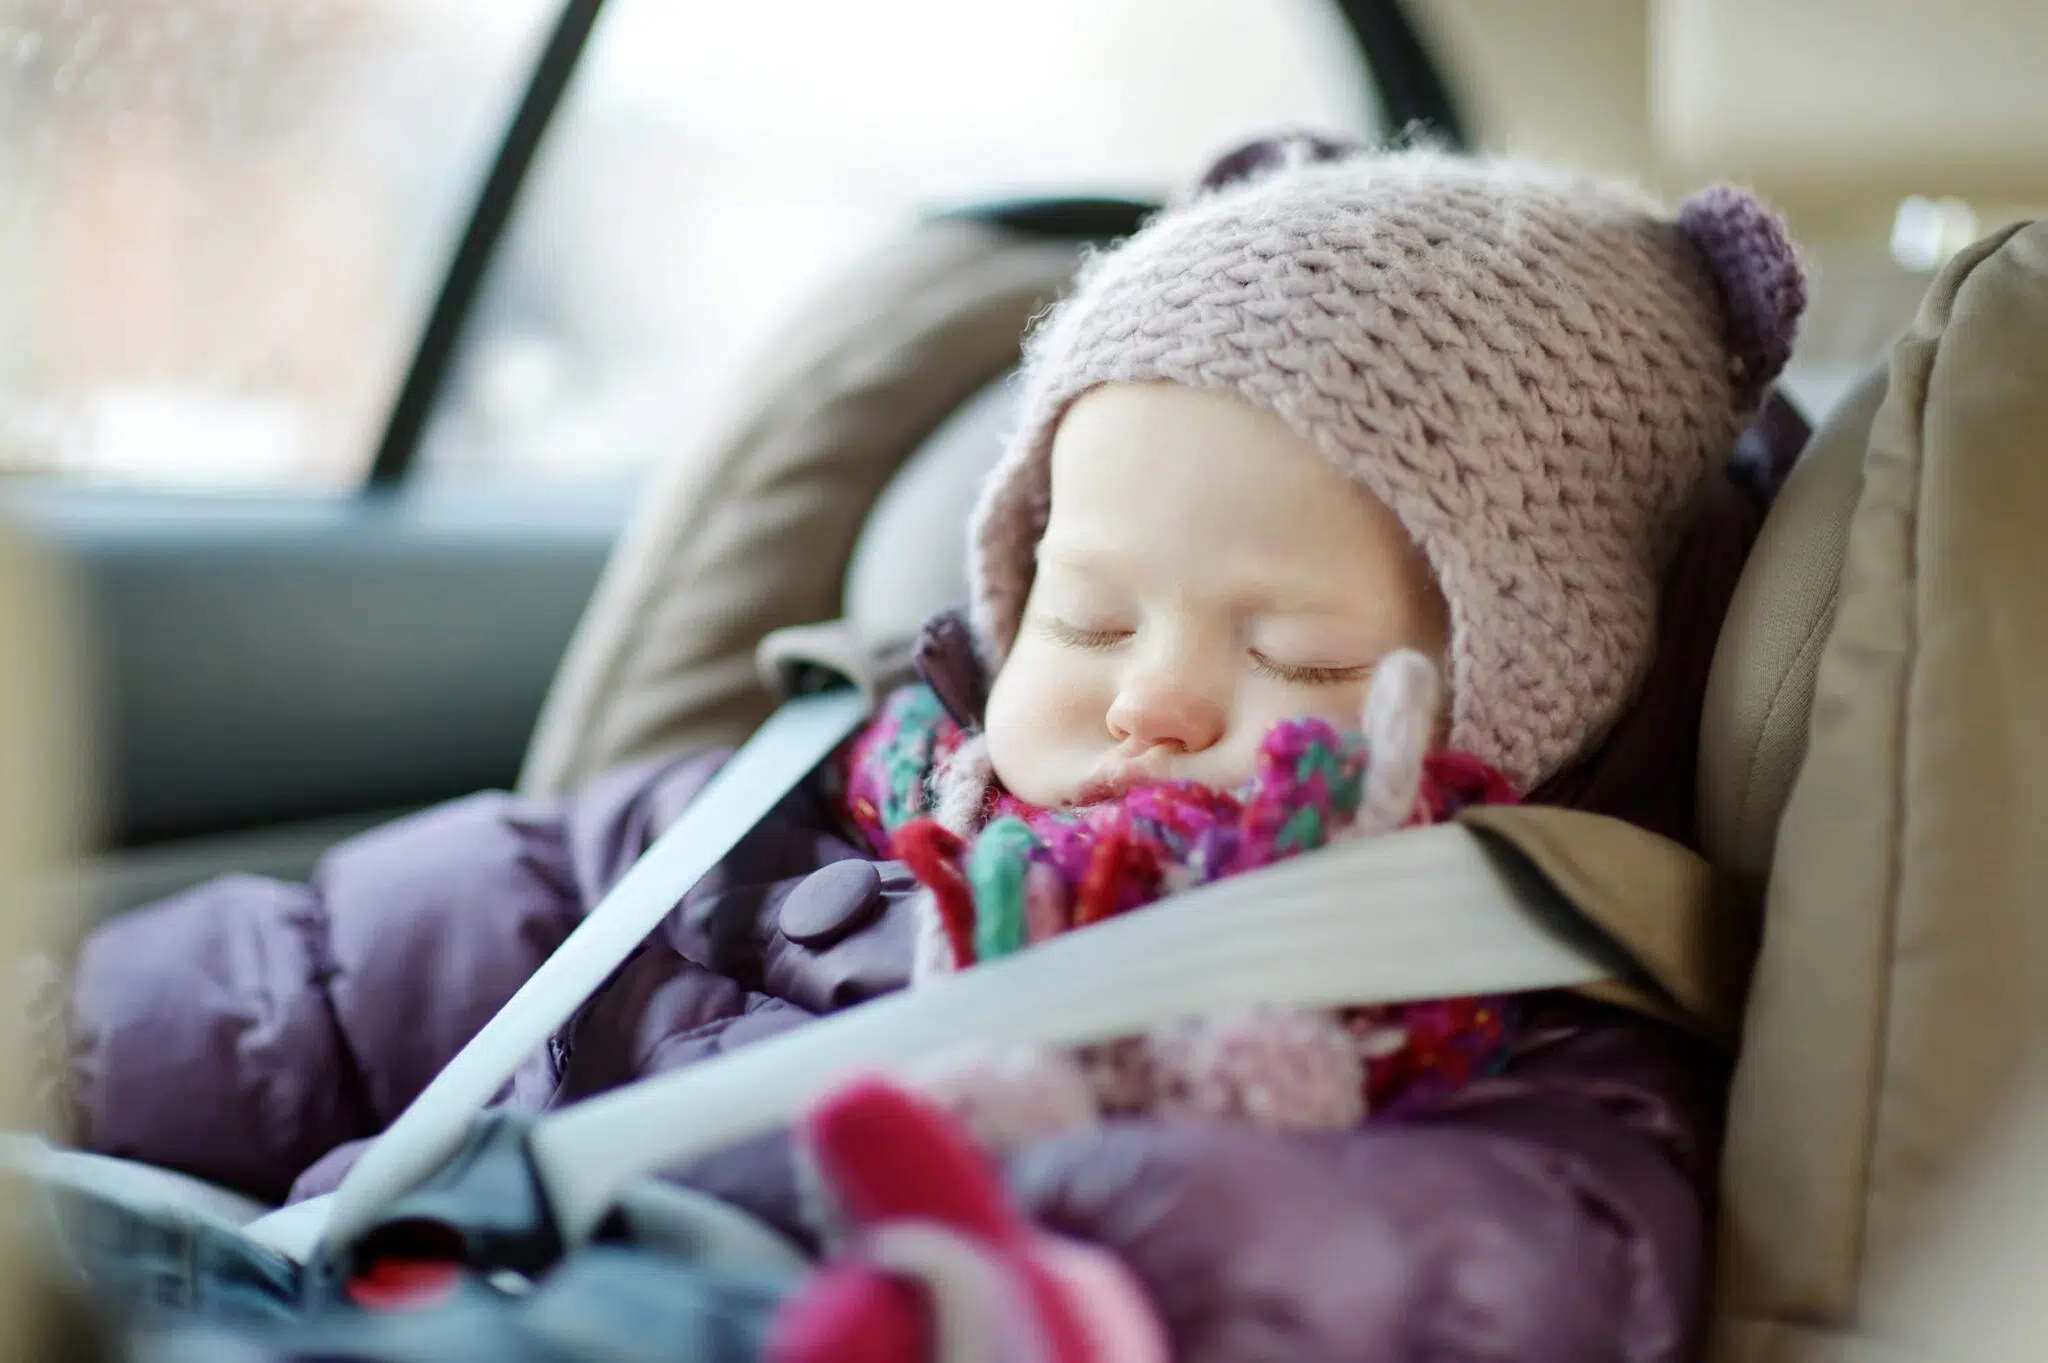 Infant in winter coat and hat in a car seat